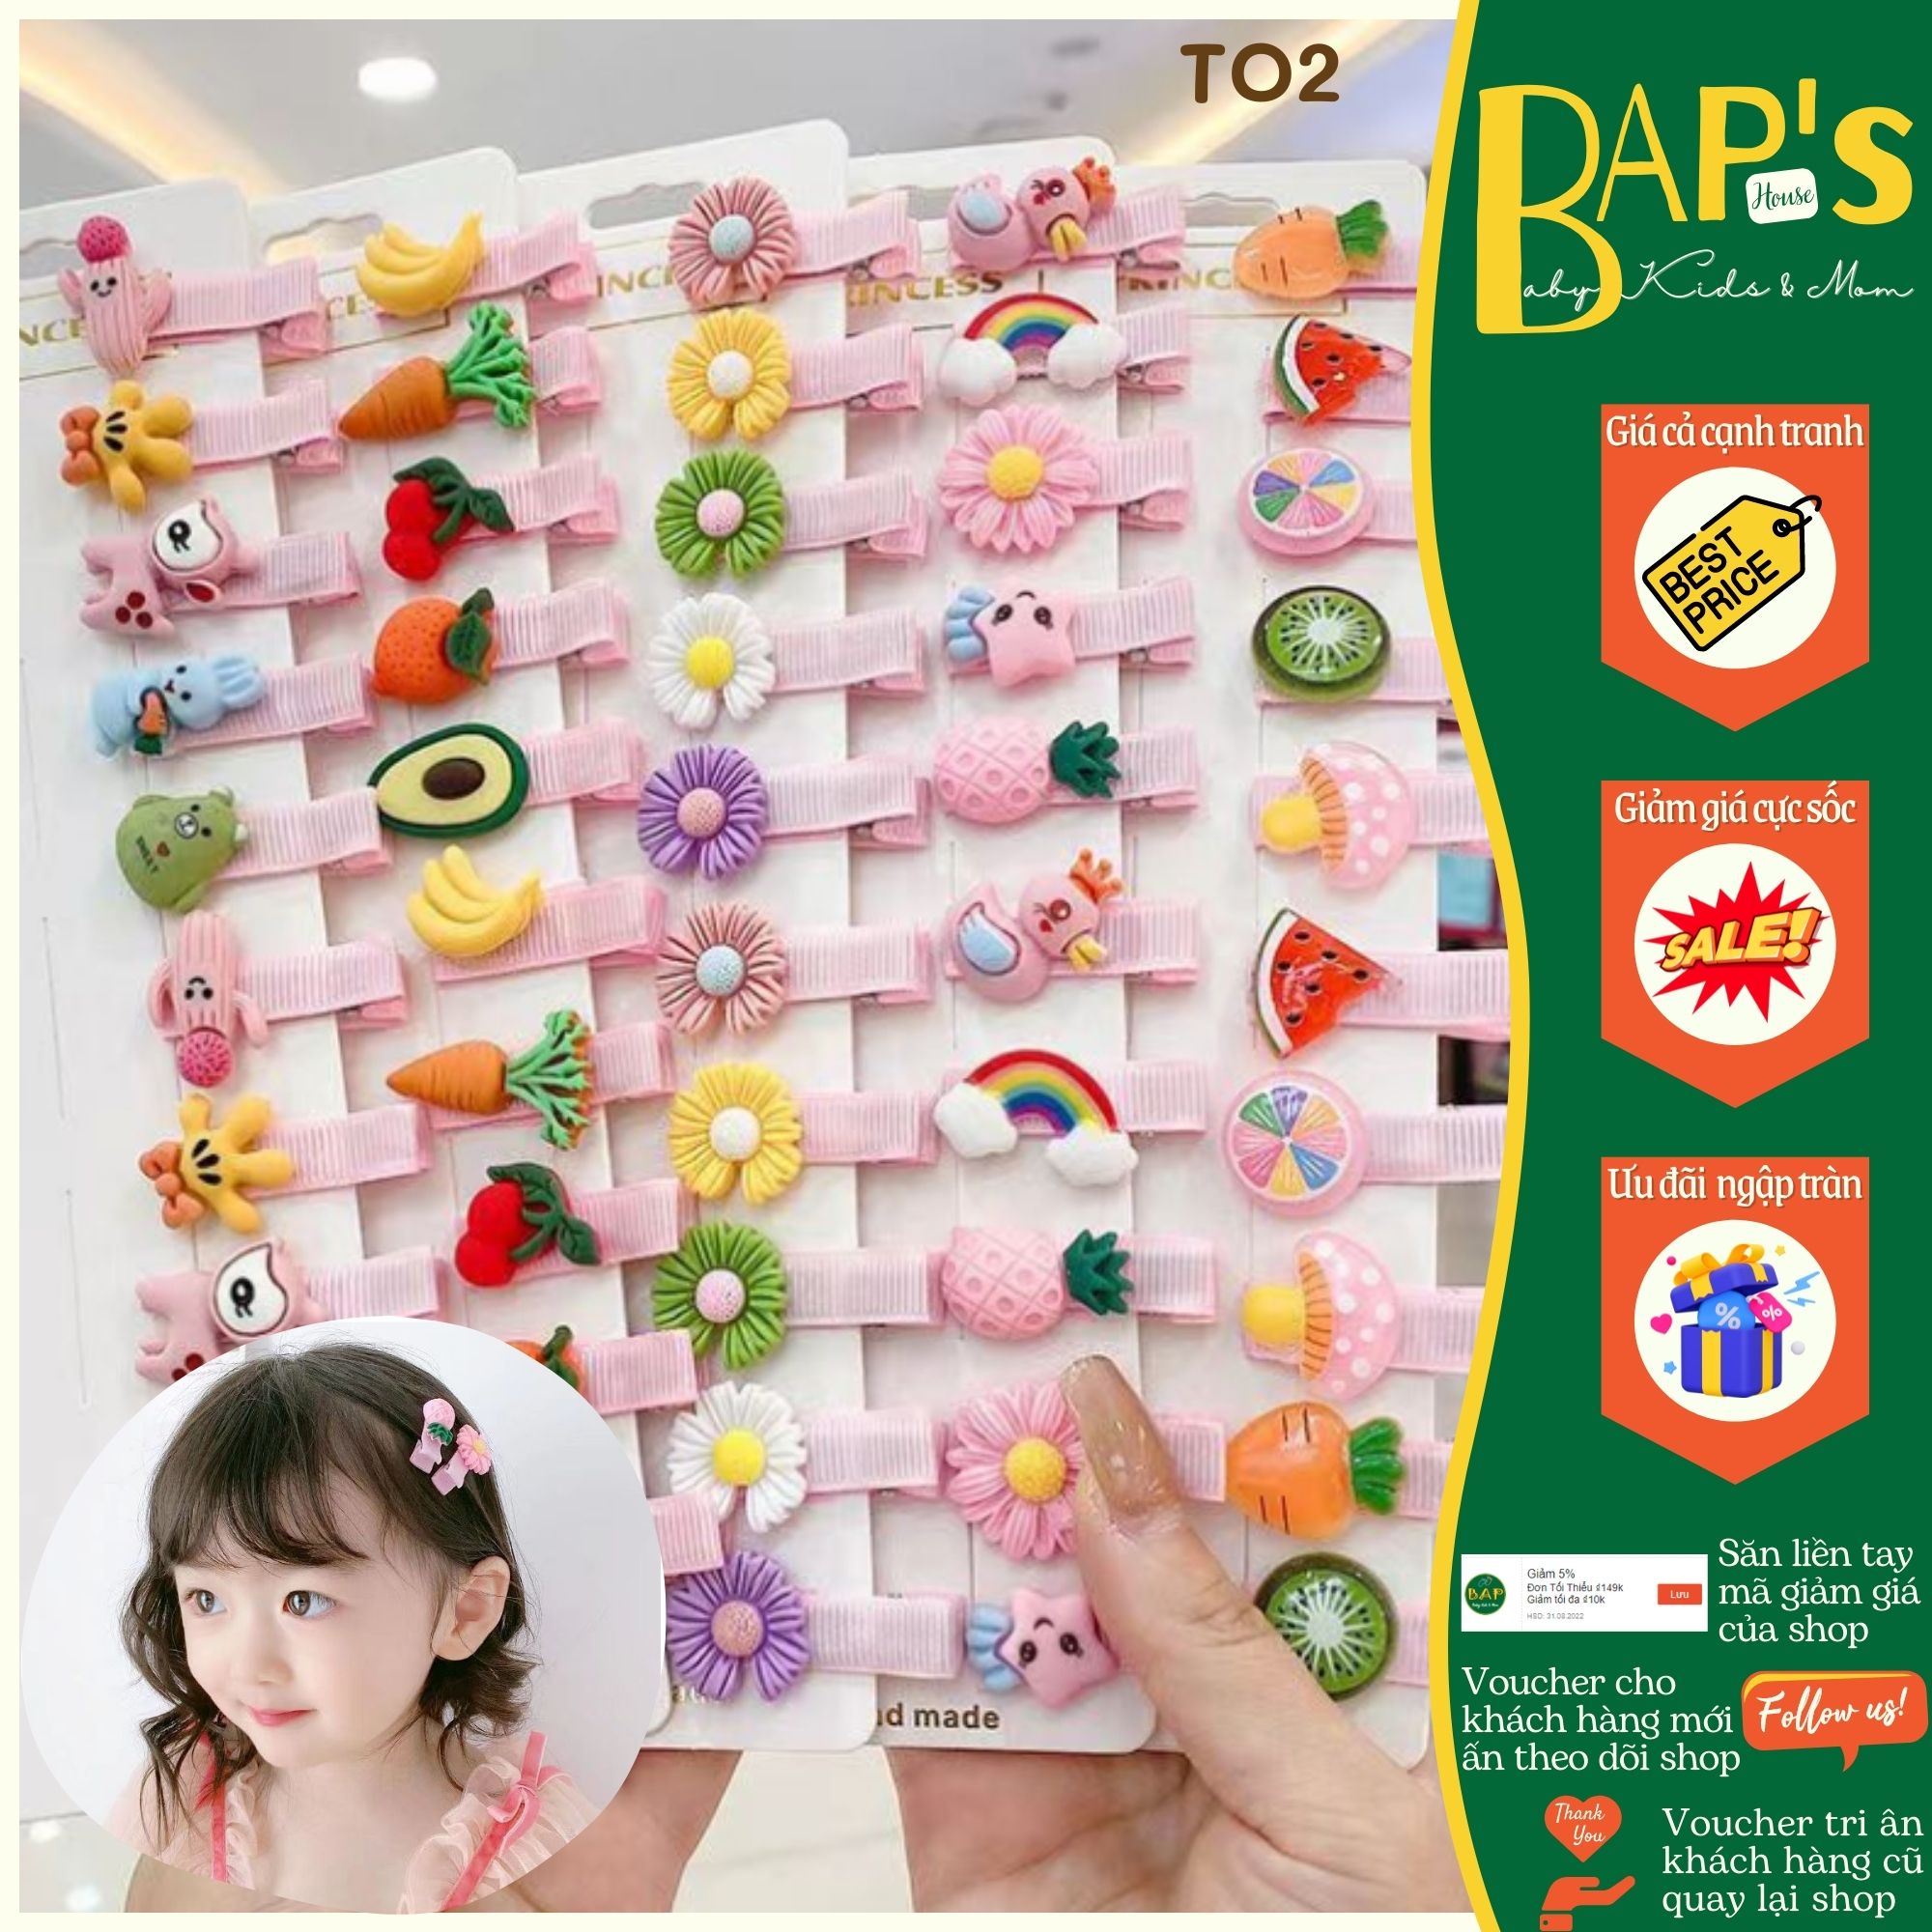 Hair clip for girls, cute hairpins many patterns choose bap s House TO2